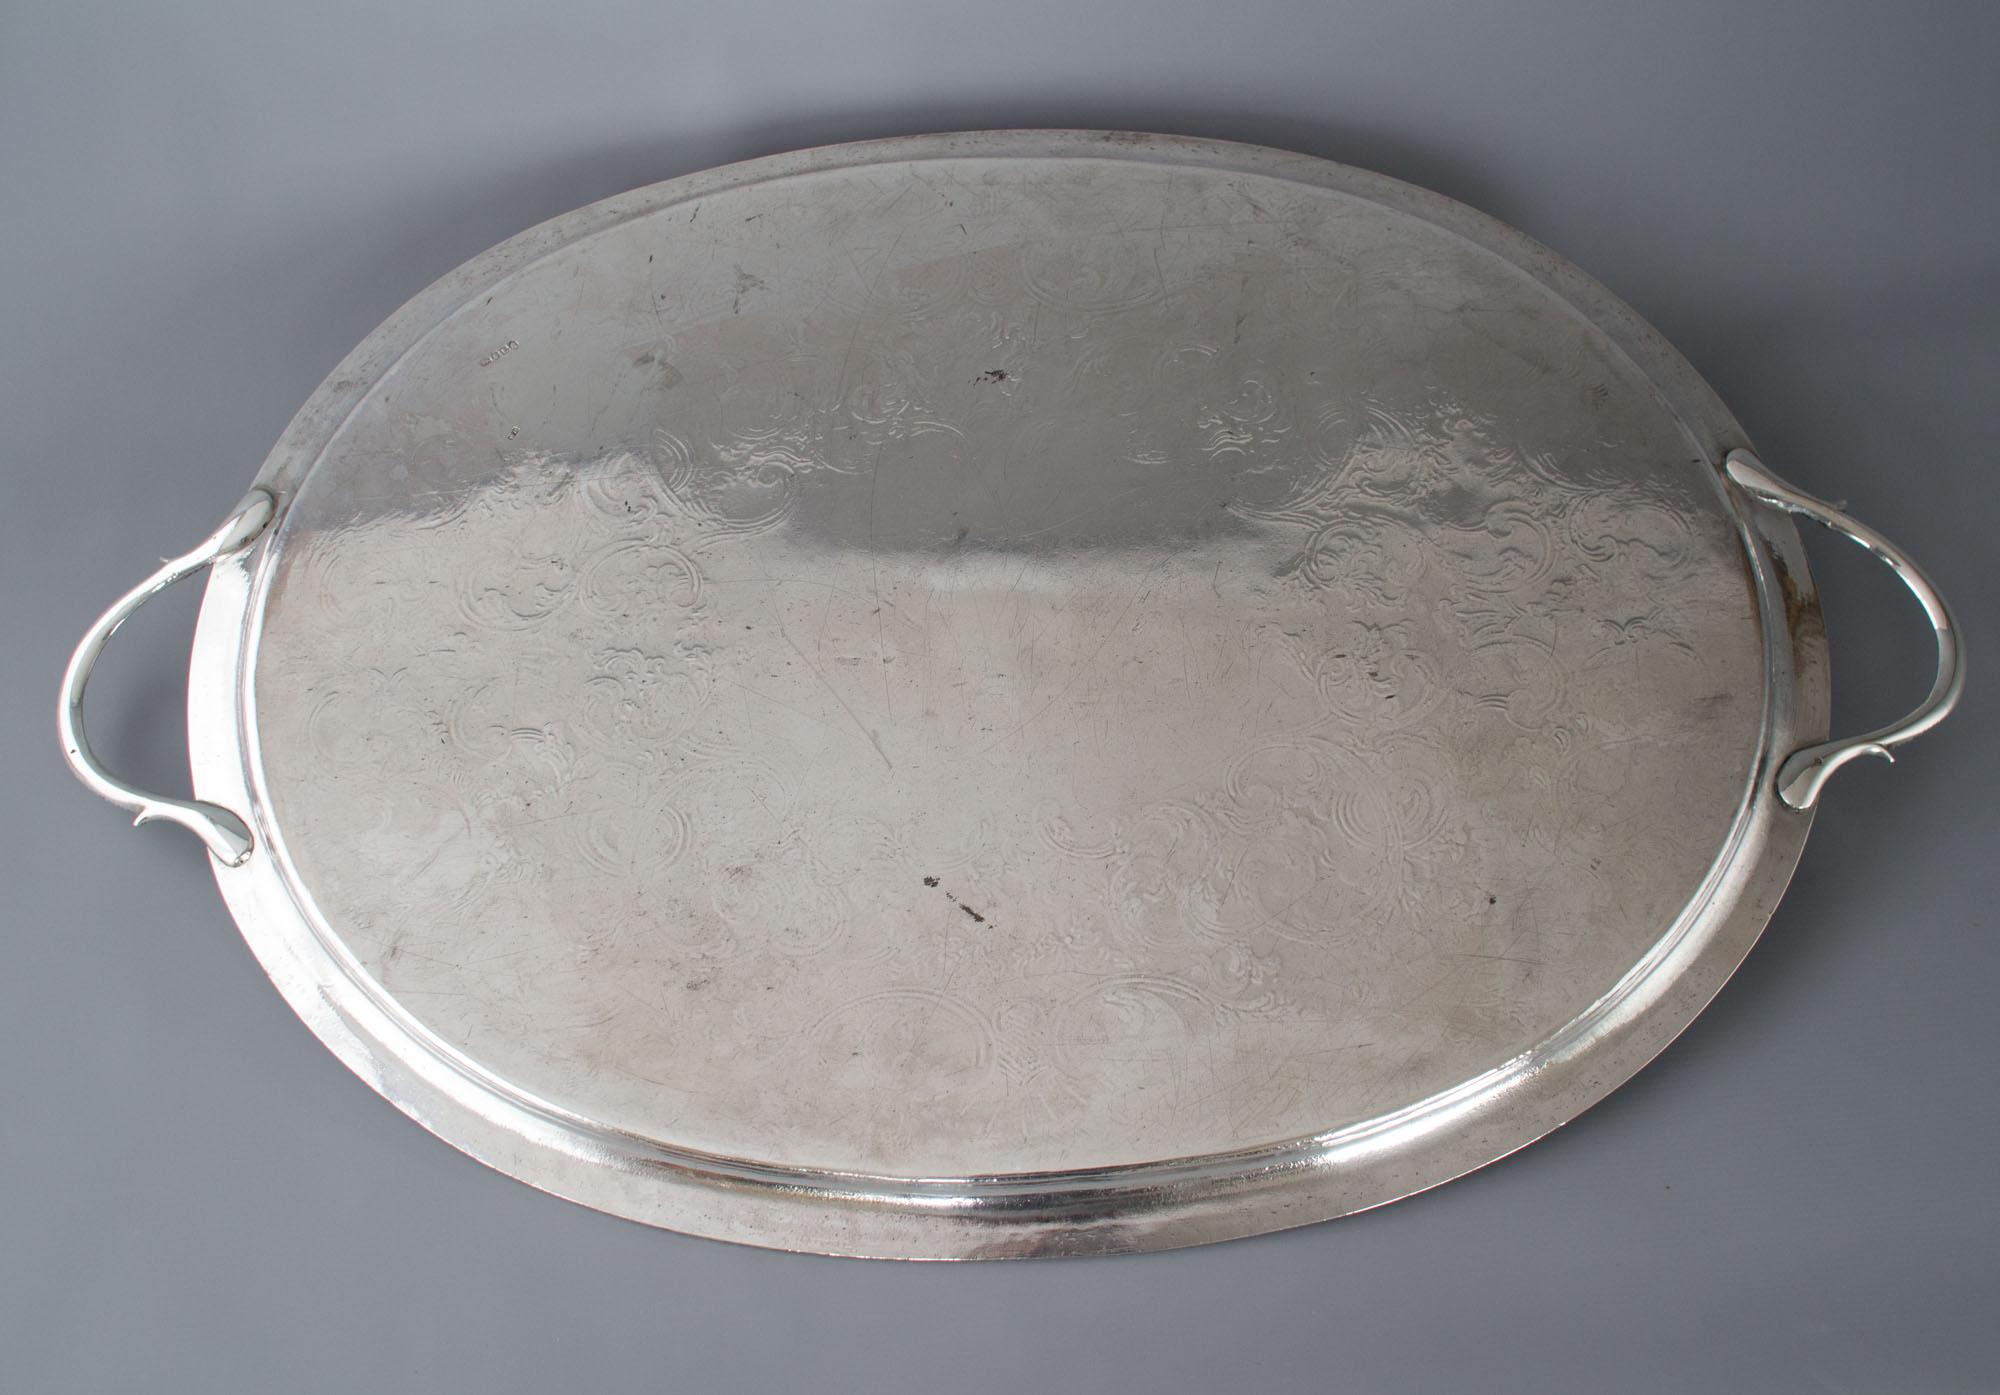 A superb high quality twin-handled George III silver tray of oval form. The cast and applied border with gadrooned rim. The two handles of conforming pattern. The central plate with an armorial in a shield beneath a dragon and the Latin inscription: